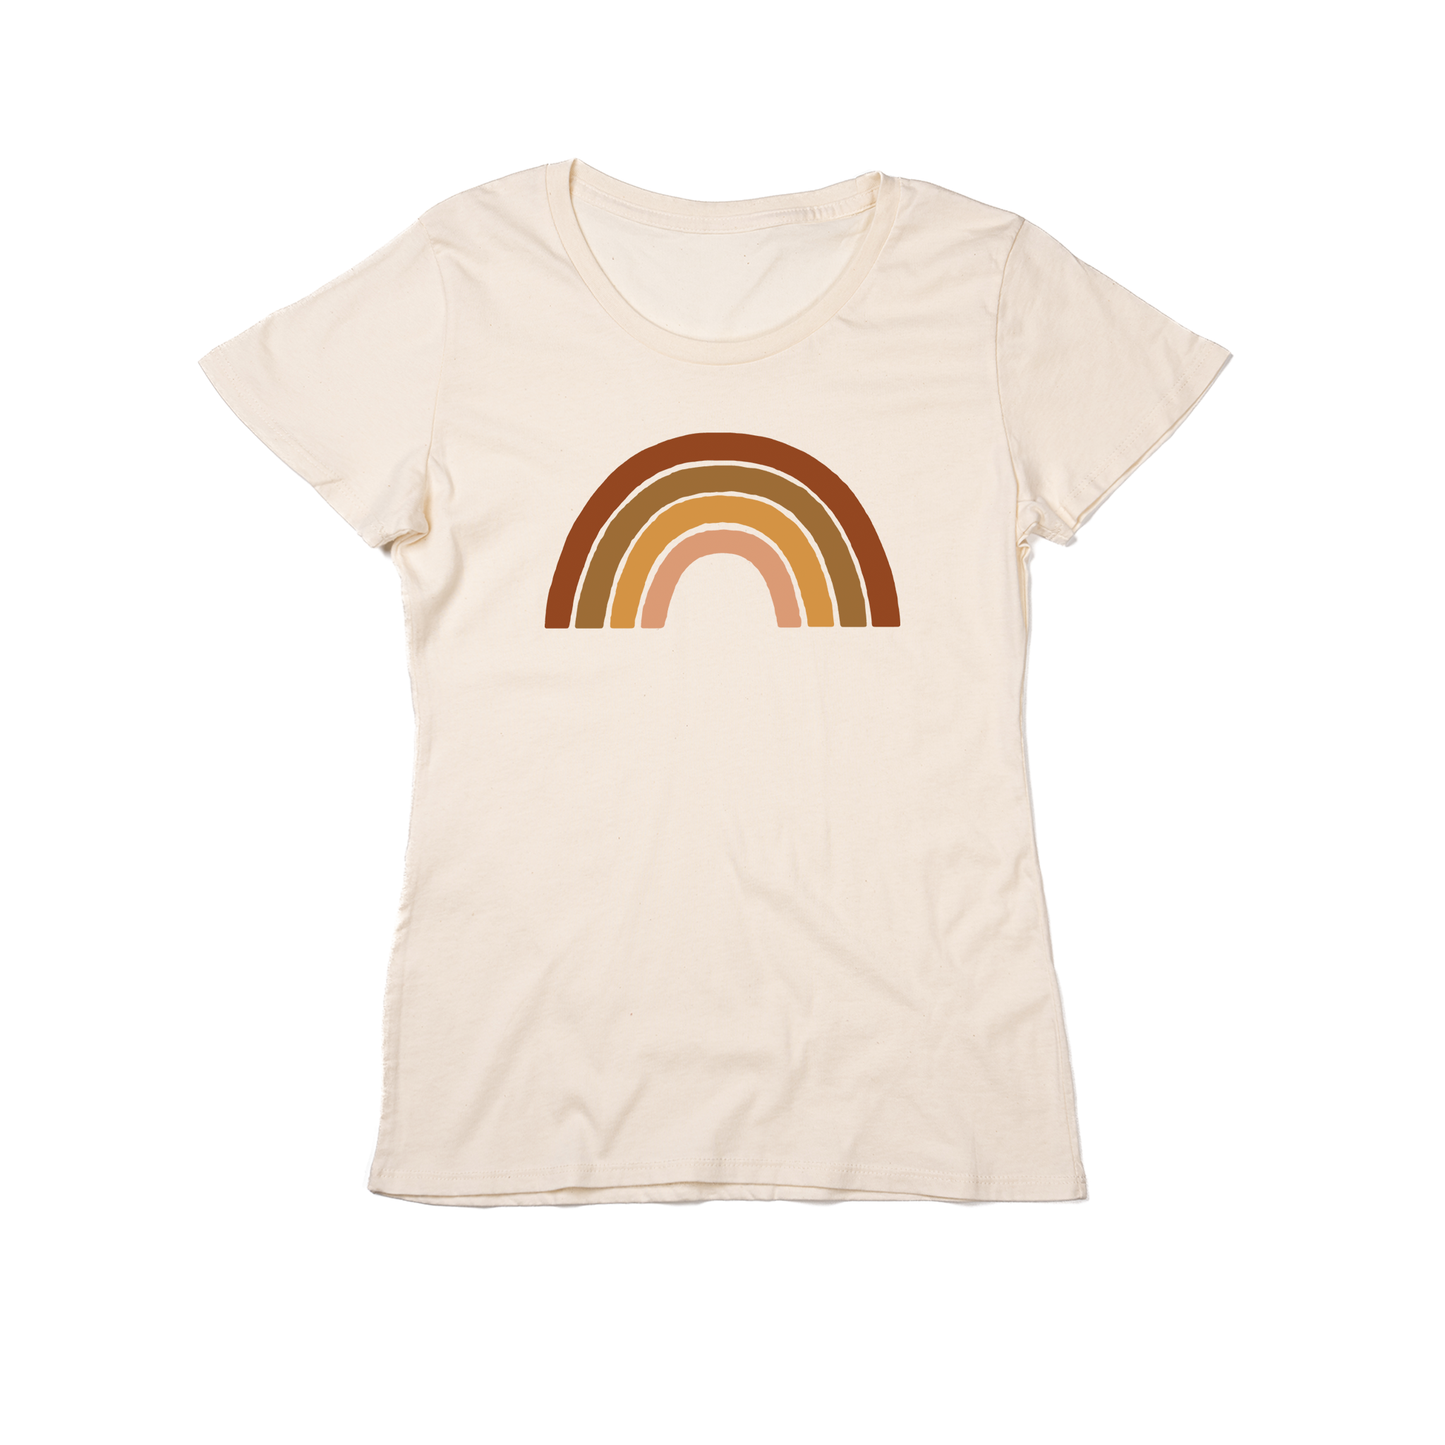 Rainbow (5 Color Options, Color Option #4) - Women's Fitted Tee (Natural)